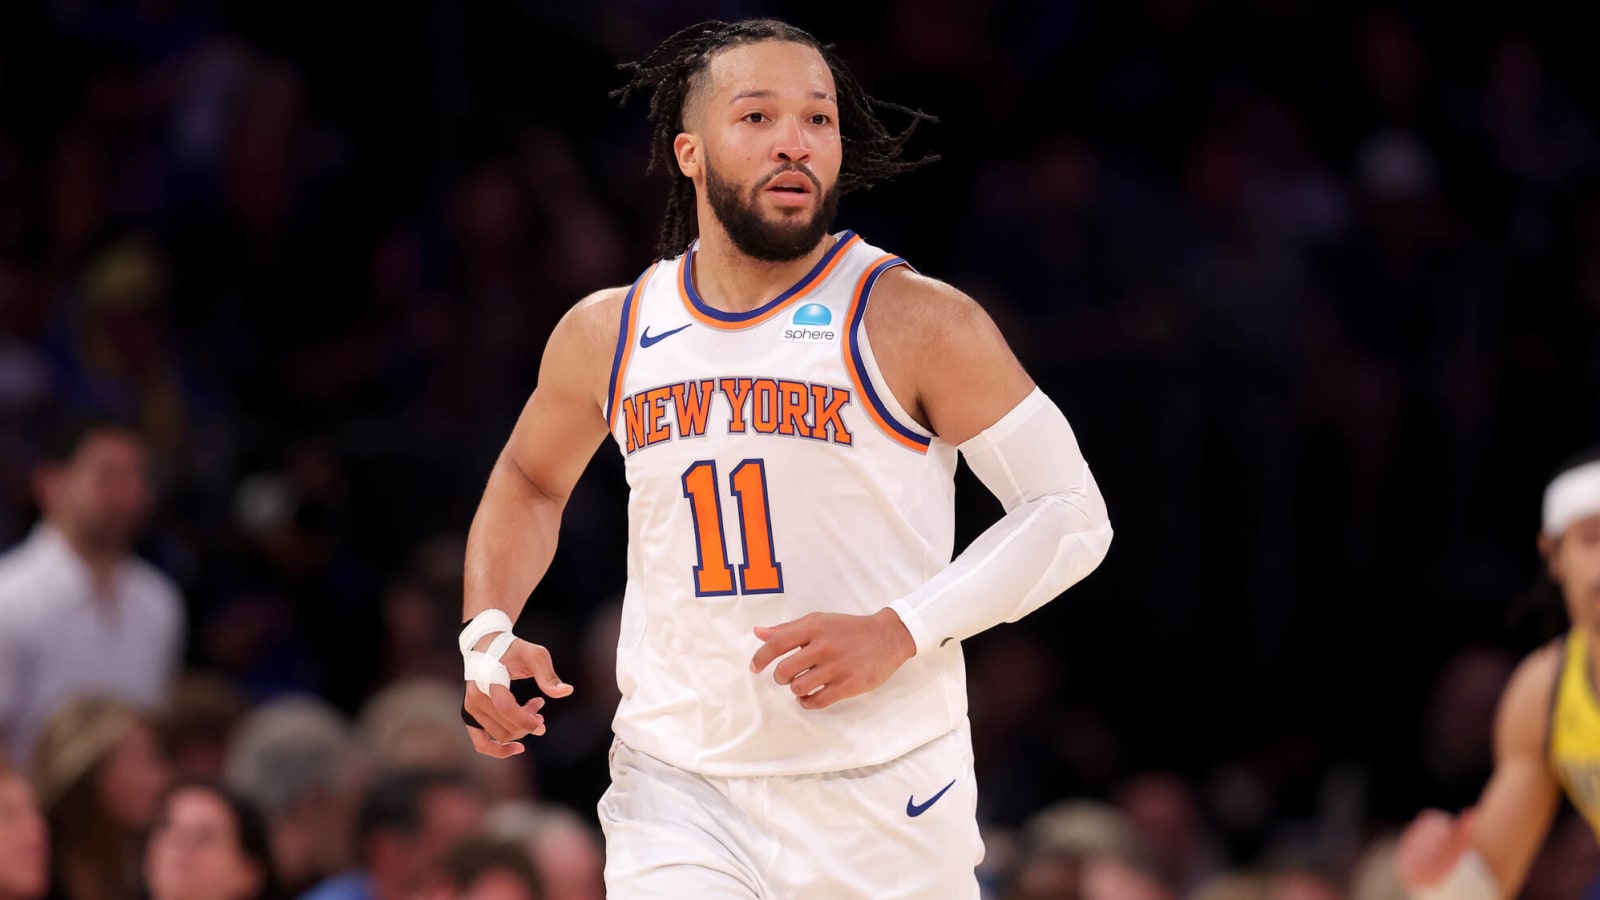 Knicks’ star point guard ‘ready’ to accept $156 million extension